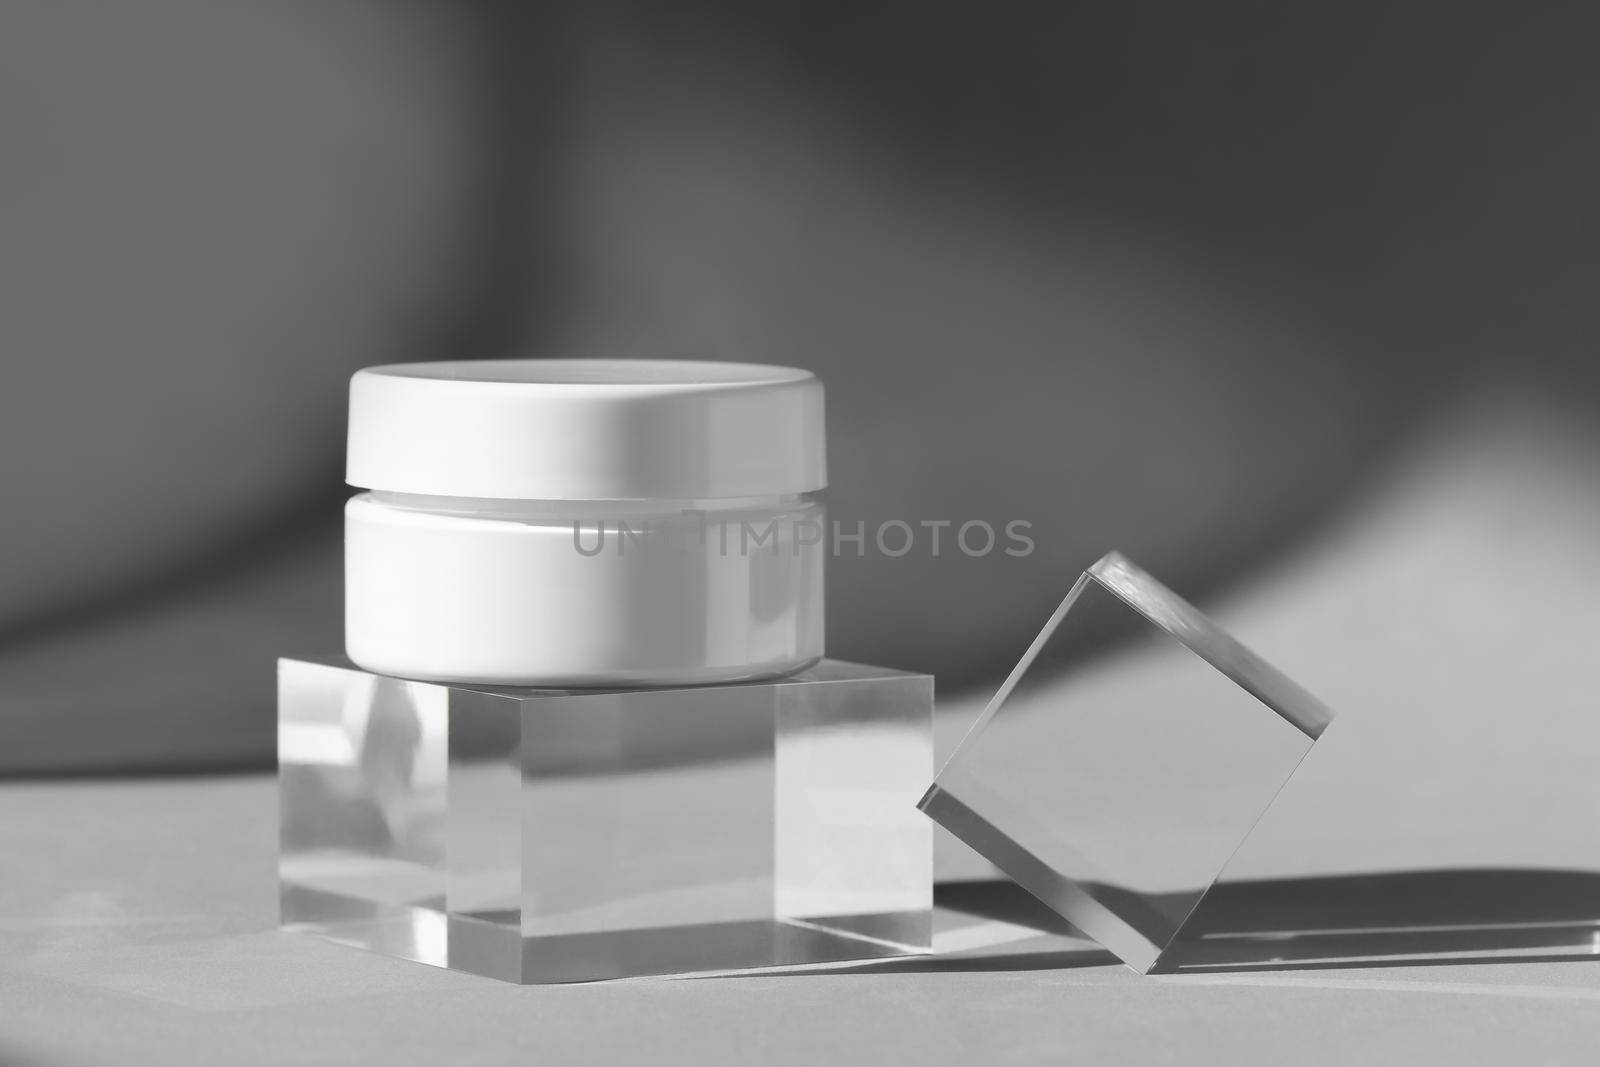 Cream lotion cosmetics showcase presentation mockup. White creme cosmetic jar on acrylic geometric pedestal podium block, product packaging with shadows from windows, Front view